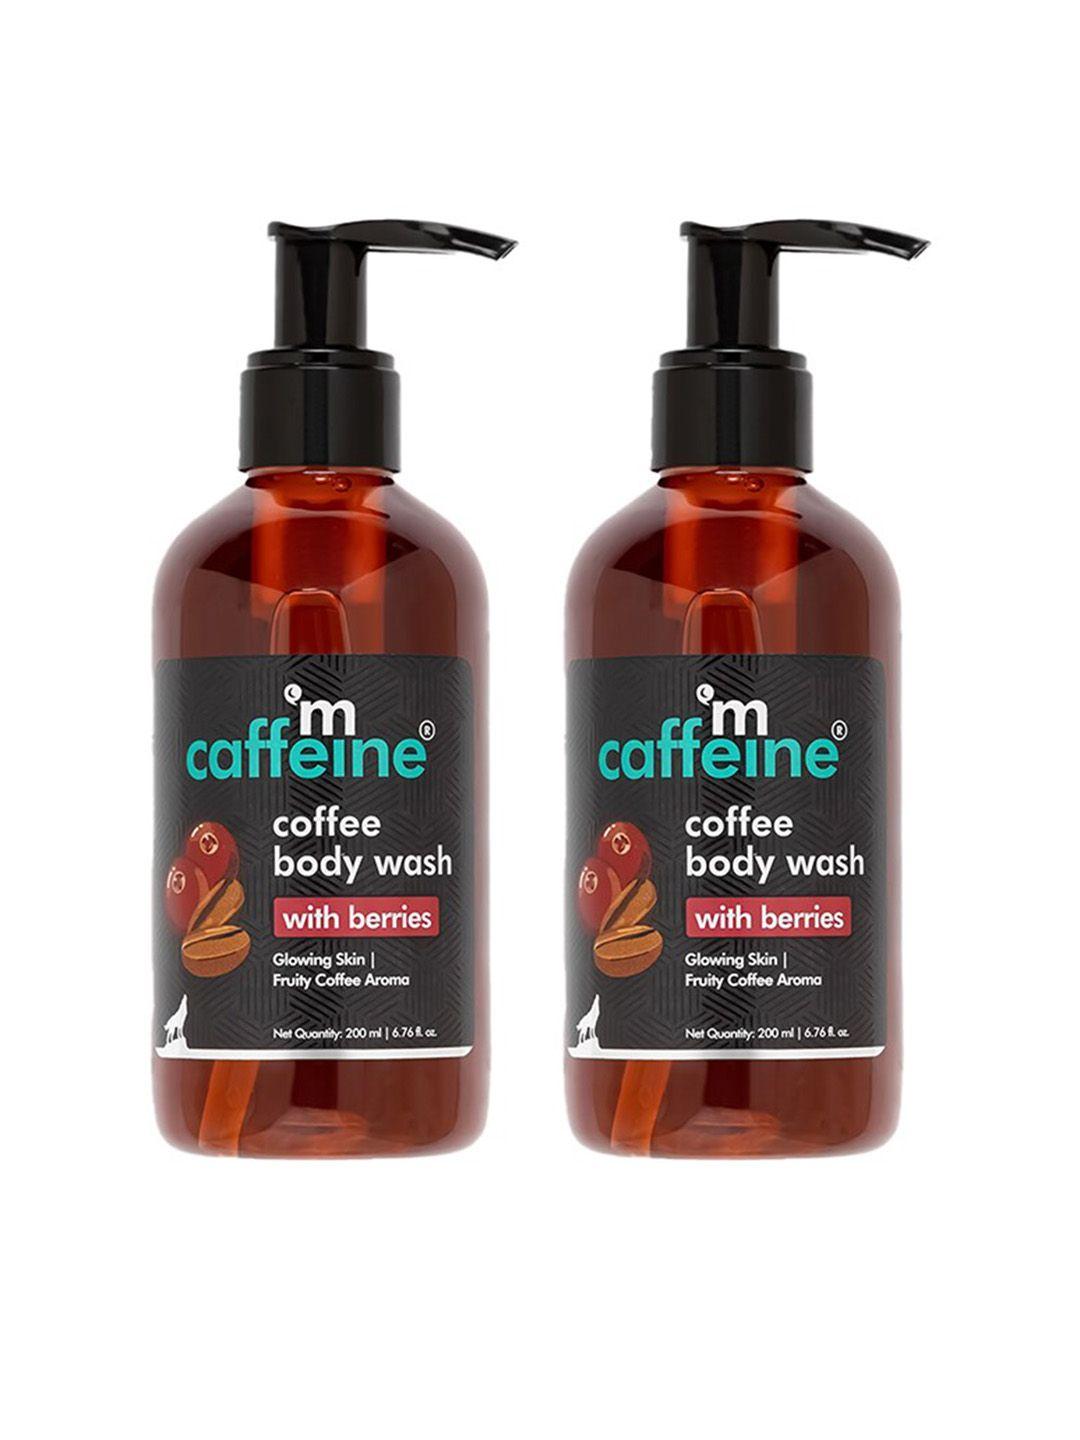 mcaffeine-pack-of-2-coffee-body-wash-with-berries